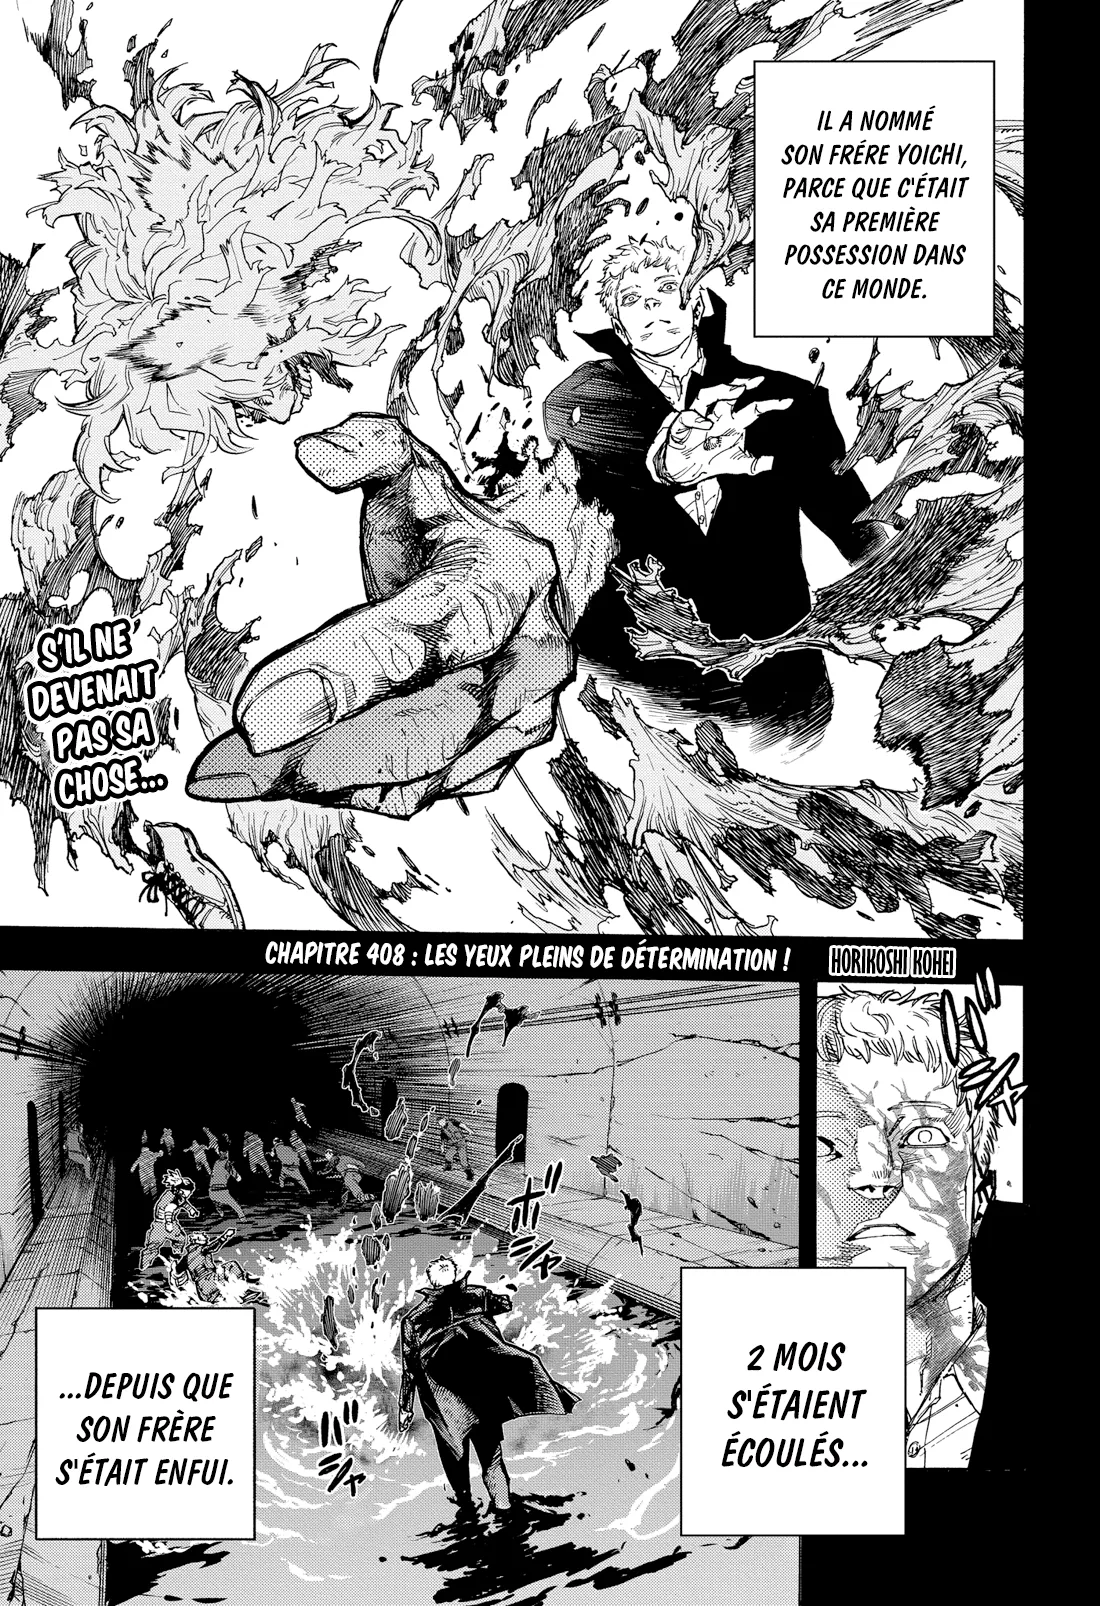 My Hero Academia: Chapter chapitre-408 - Page 1